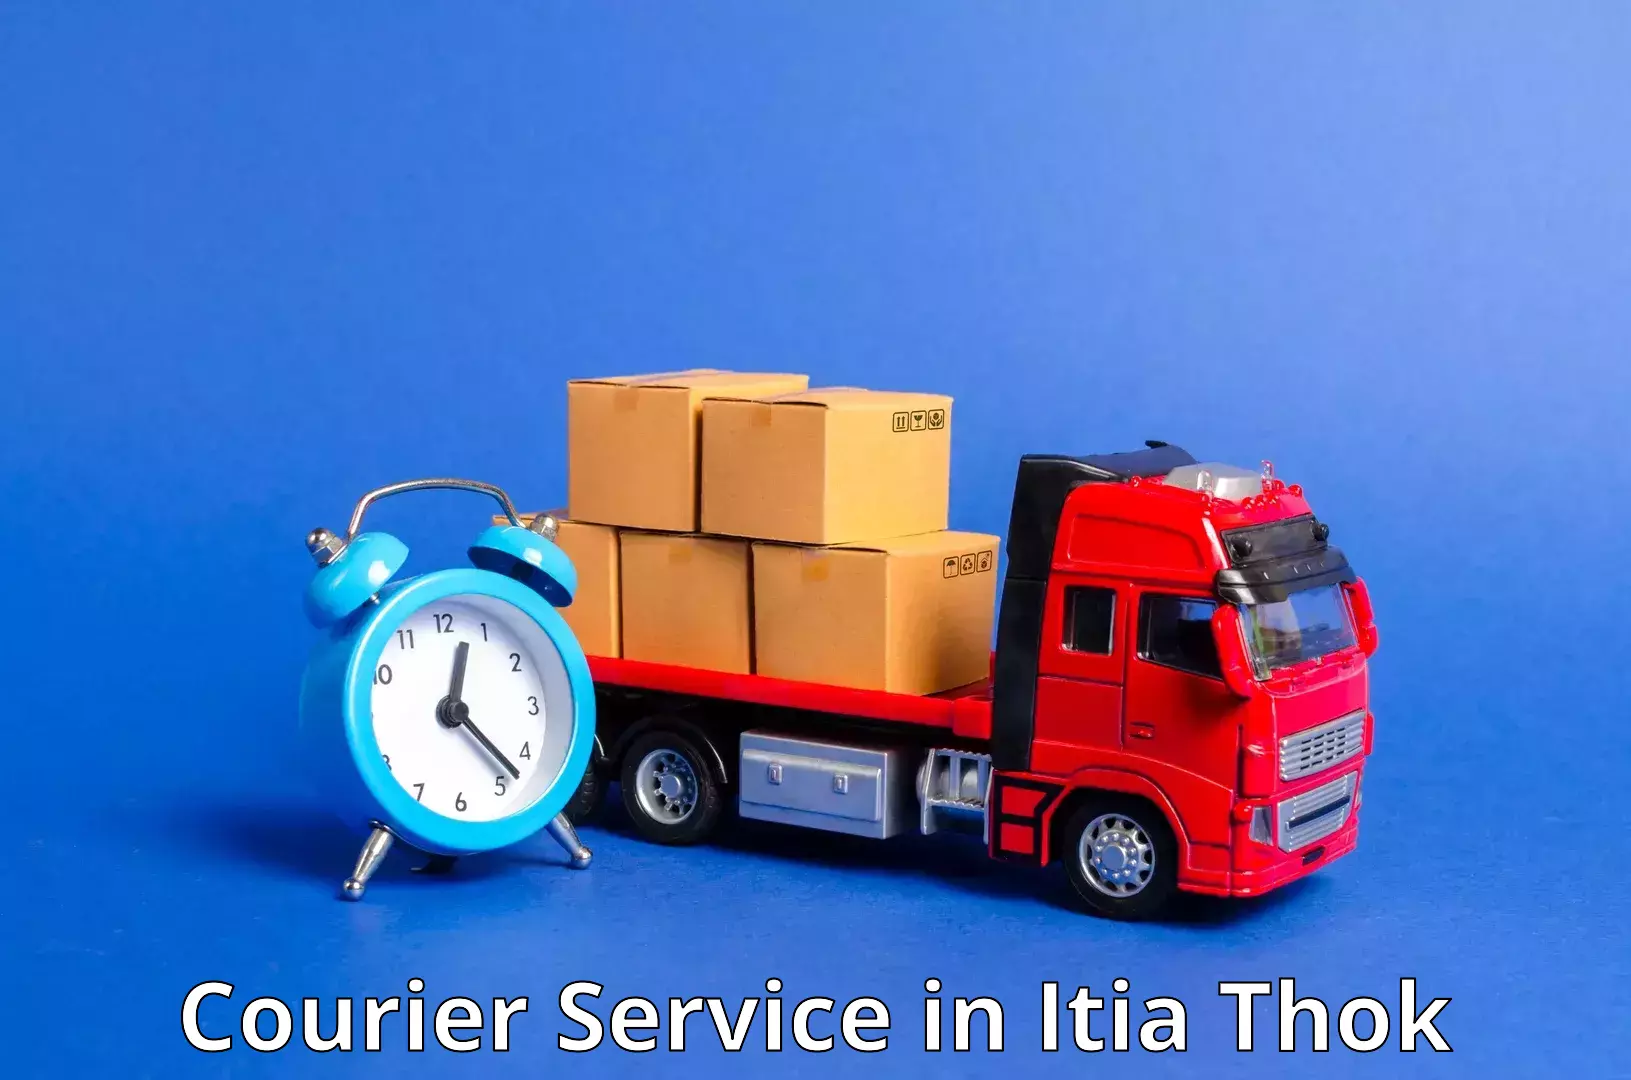 High-priority parcel service in Itia Thok